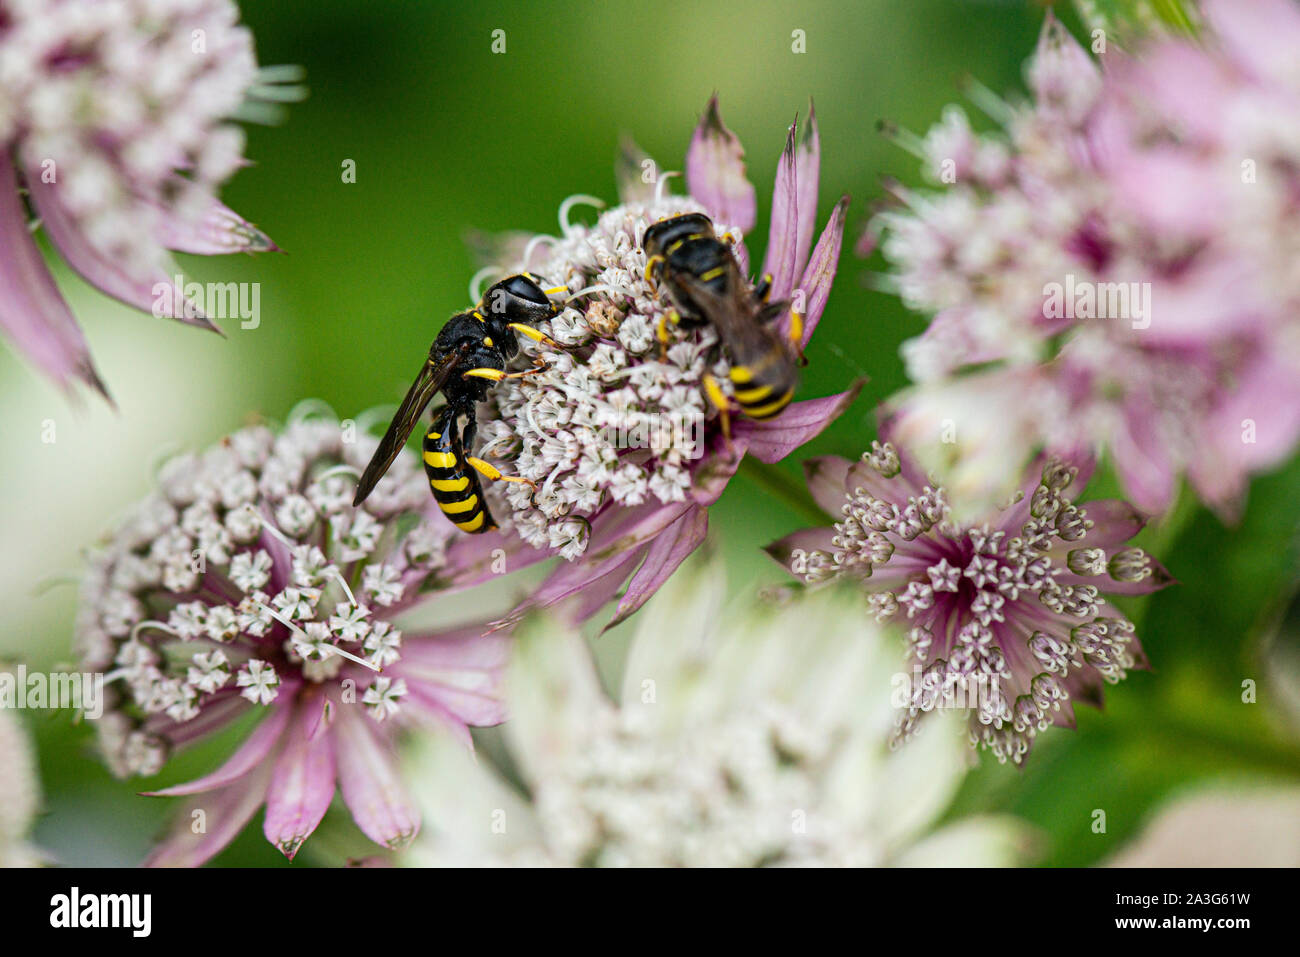 Digger wasps (Ectemnius cephalotes) on the flower an Astrantia Stock Photo